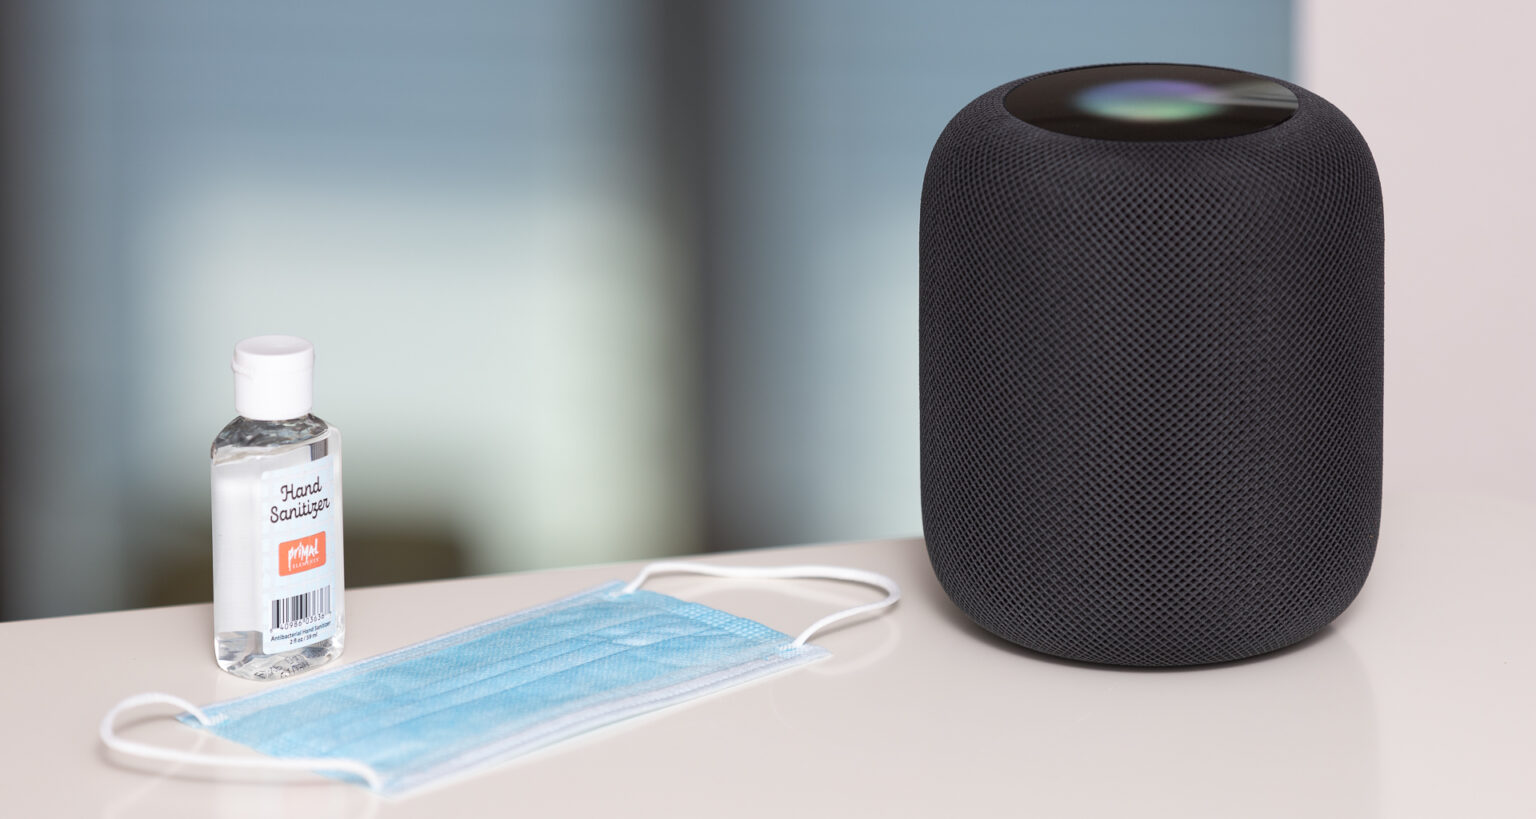 During the Covid-19 pandemic, voice control with smart speakers, such as the Apple HomePod, are a safe bet. Image: Digitized House.